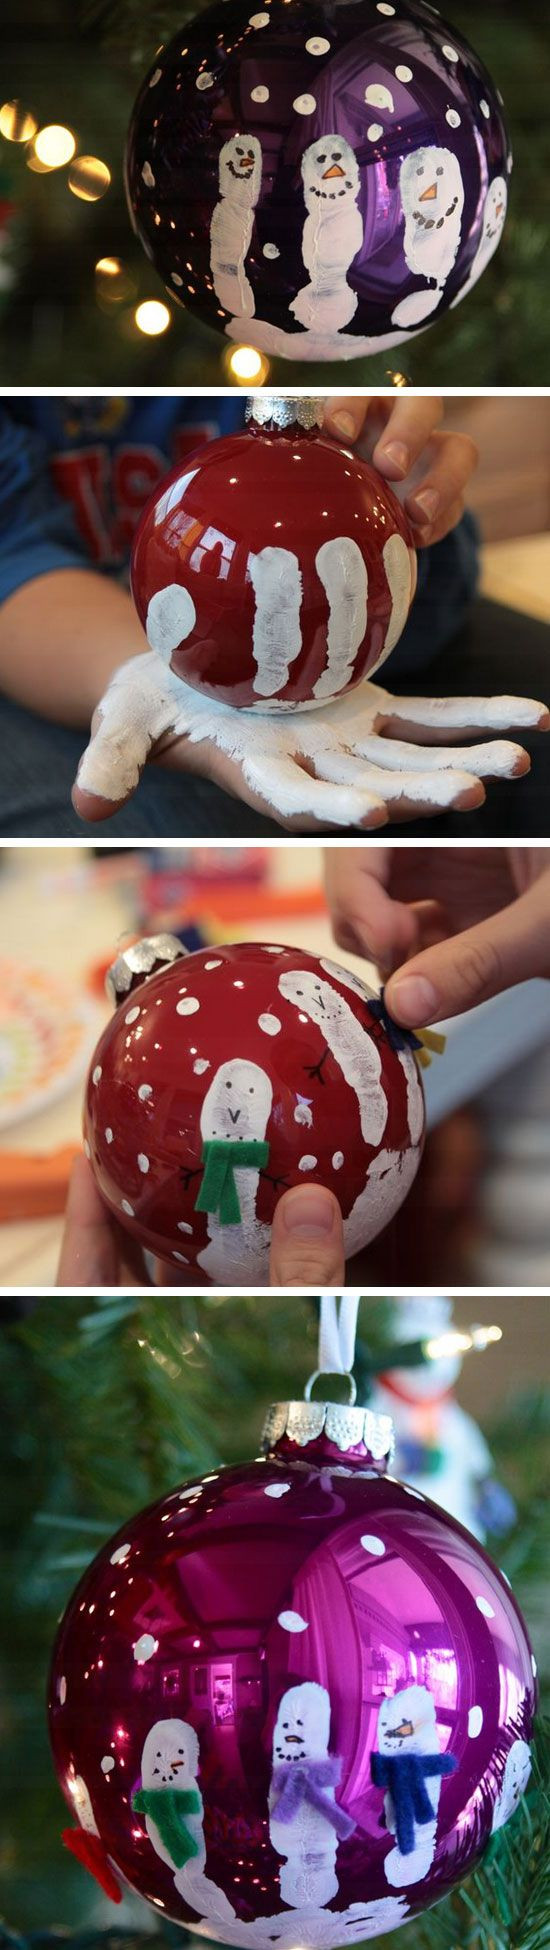 DIY Craft Projects For Kids
 Easy and Cute DIY Christmas Crafts for Kids to Make Hative